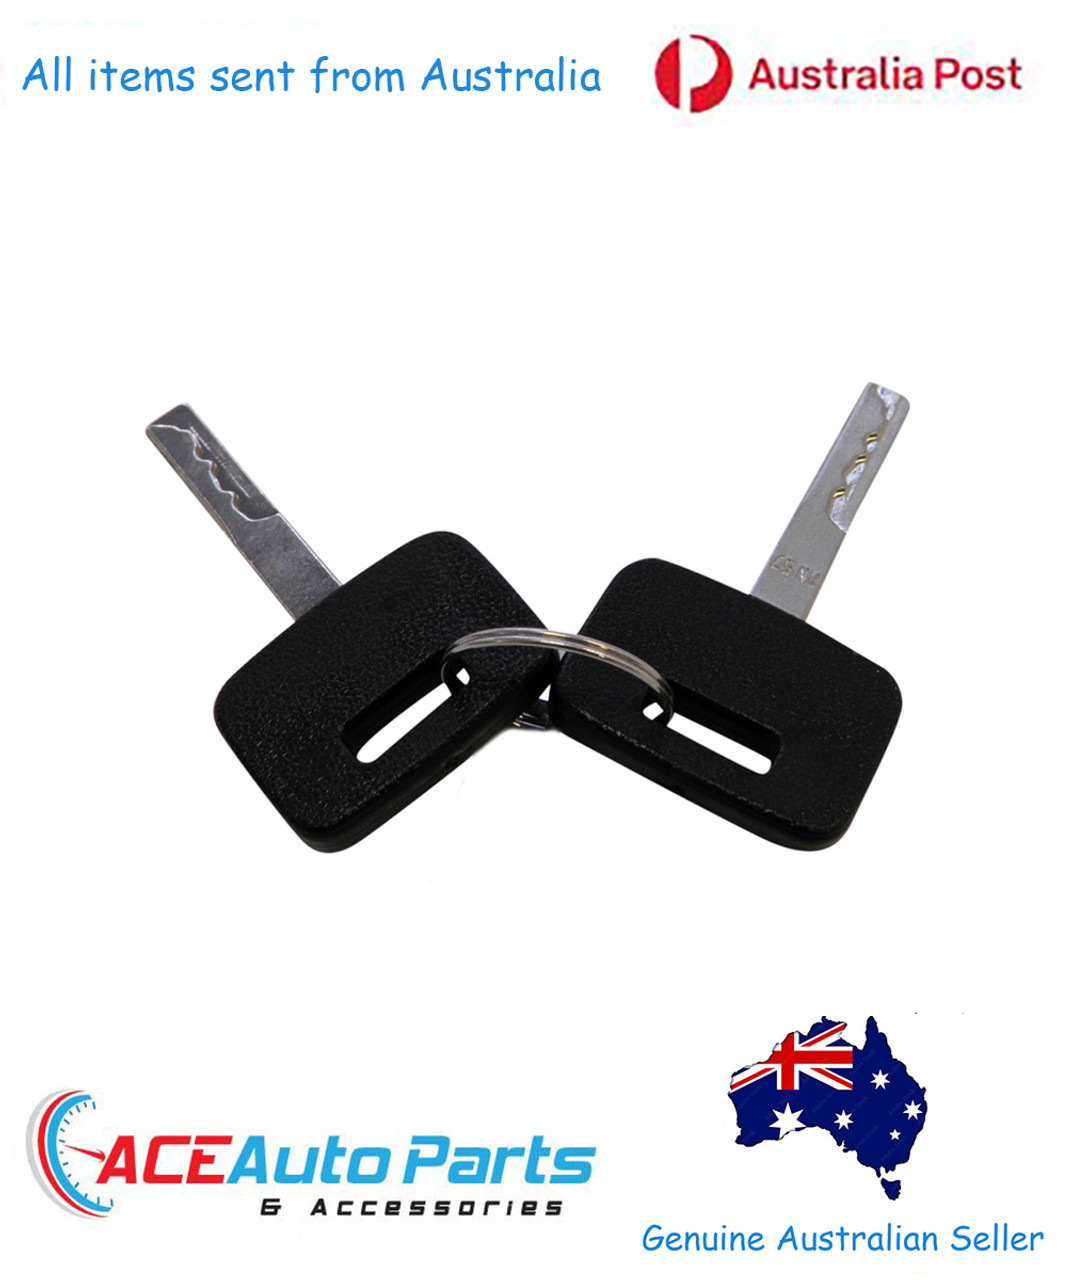 New Ignition Barrel Switch + Door Locks Set For Commodore VG + VP Ute 